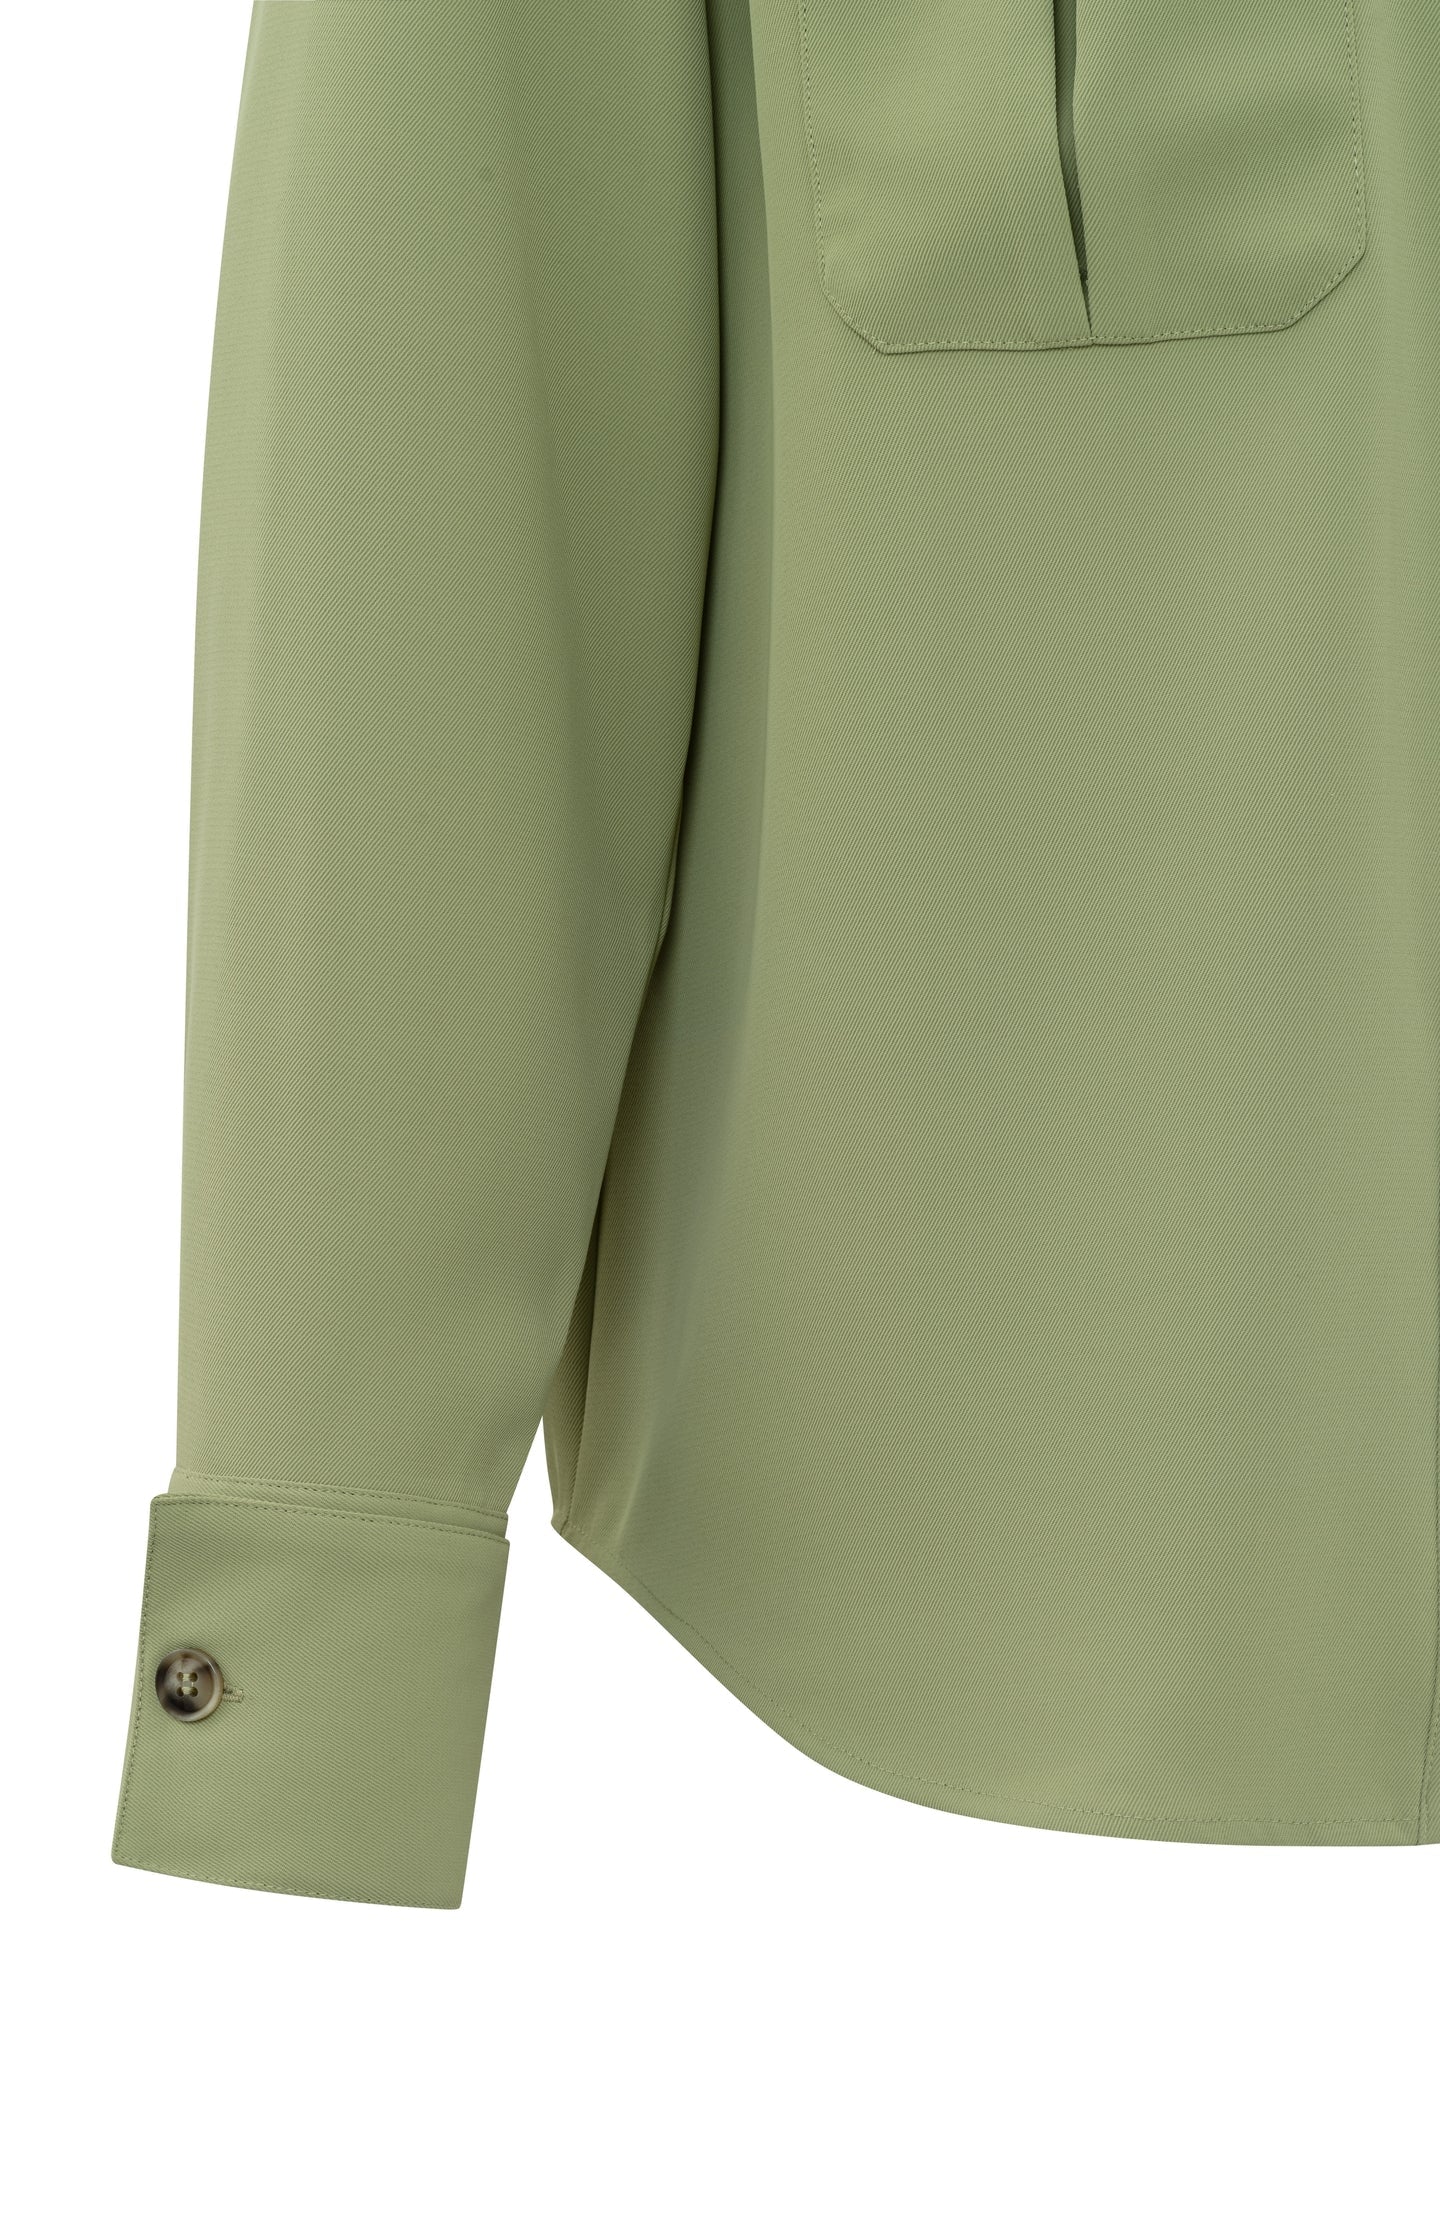 Cargo blouse with collar, long sleeves, buttons and pockets - Sage Green